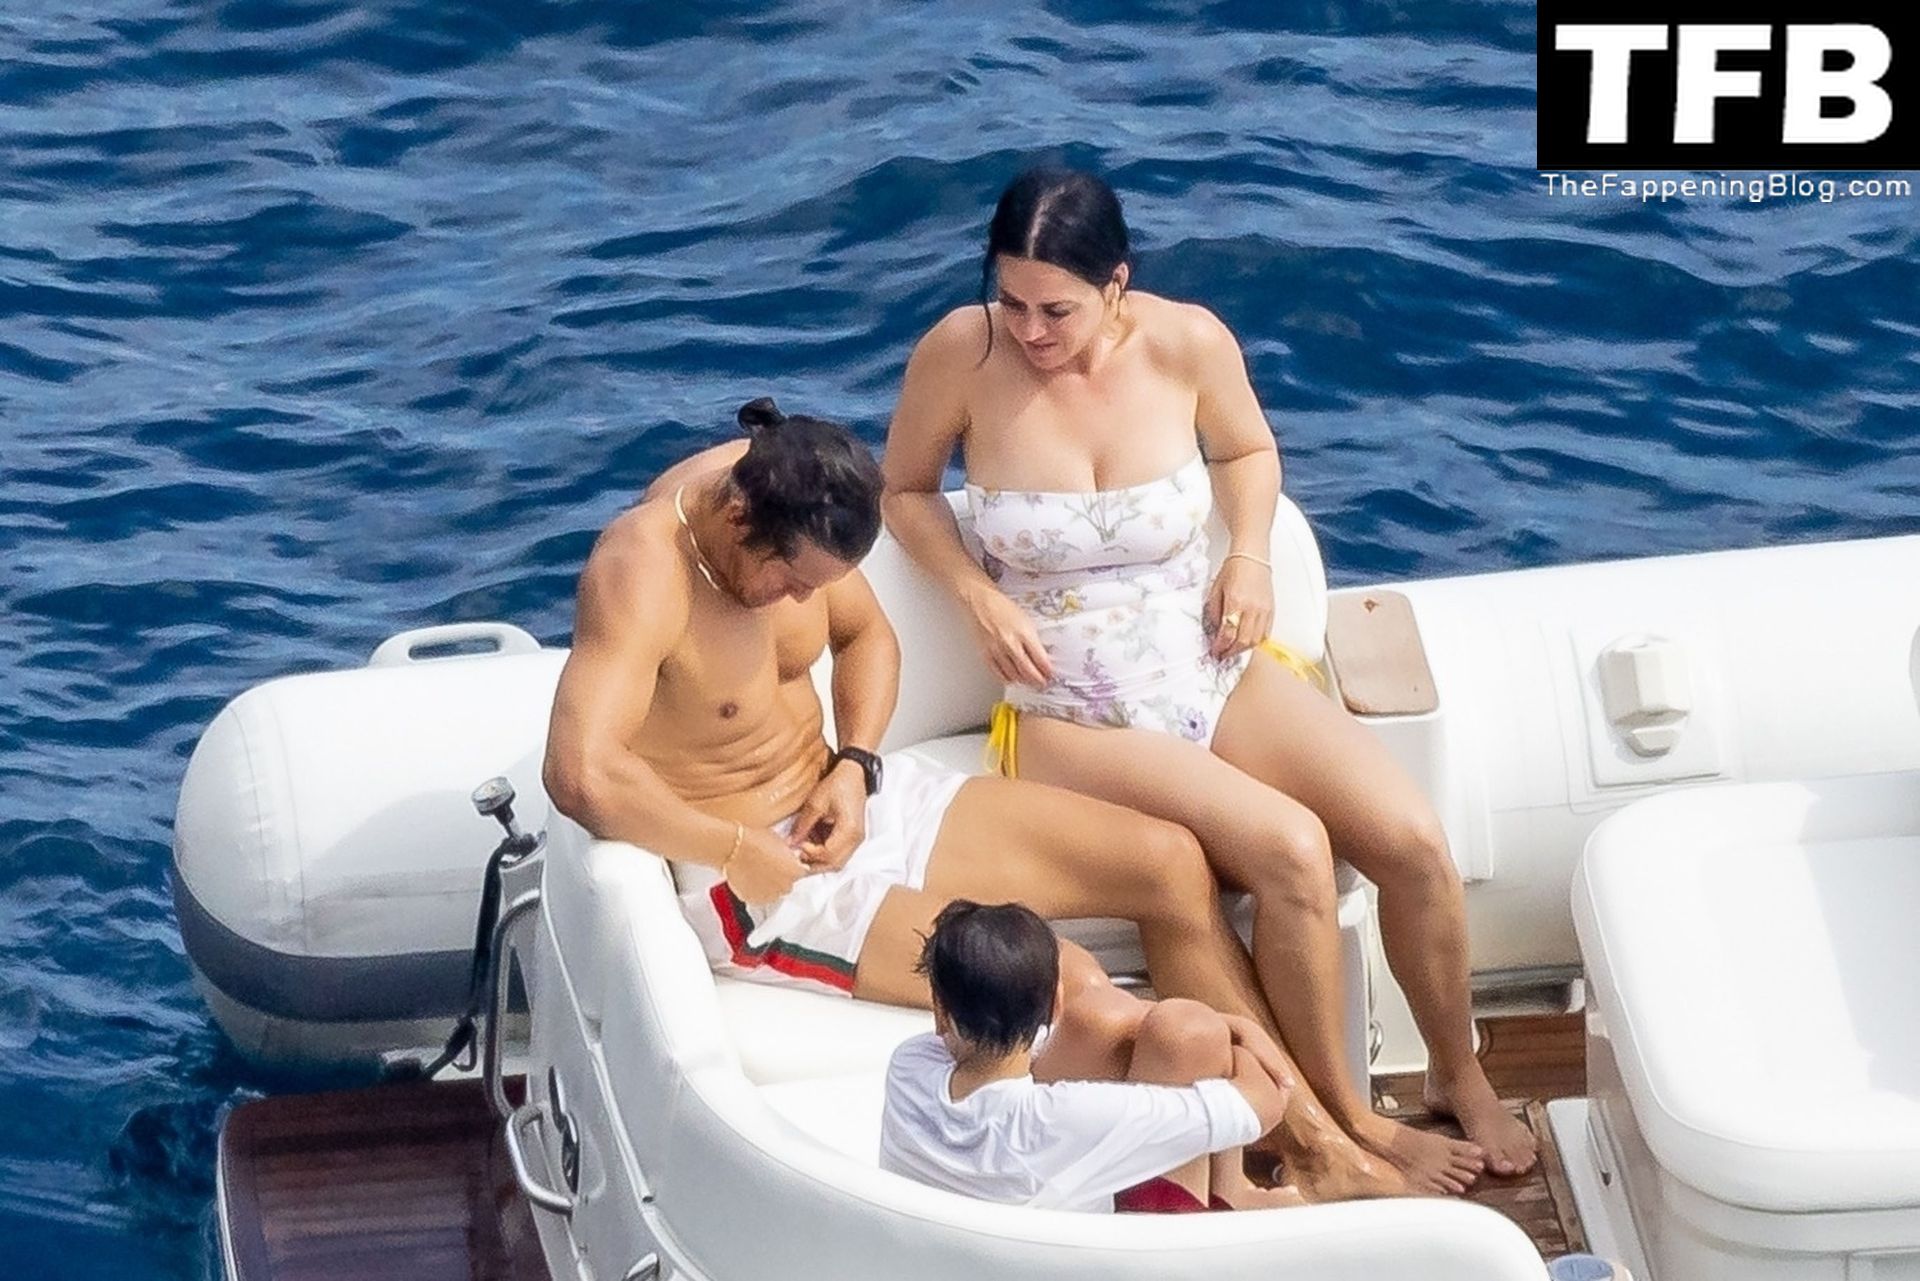 Katy Perry Sexy The Fappening Blog 9 - Katy Perry Rocks a Strapless Swimsuit While Enjoying a Beach Day with Orlando Bloom in Positano (105 Photos)